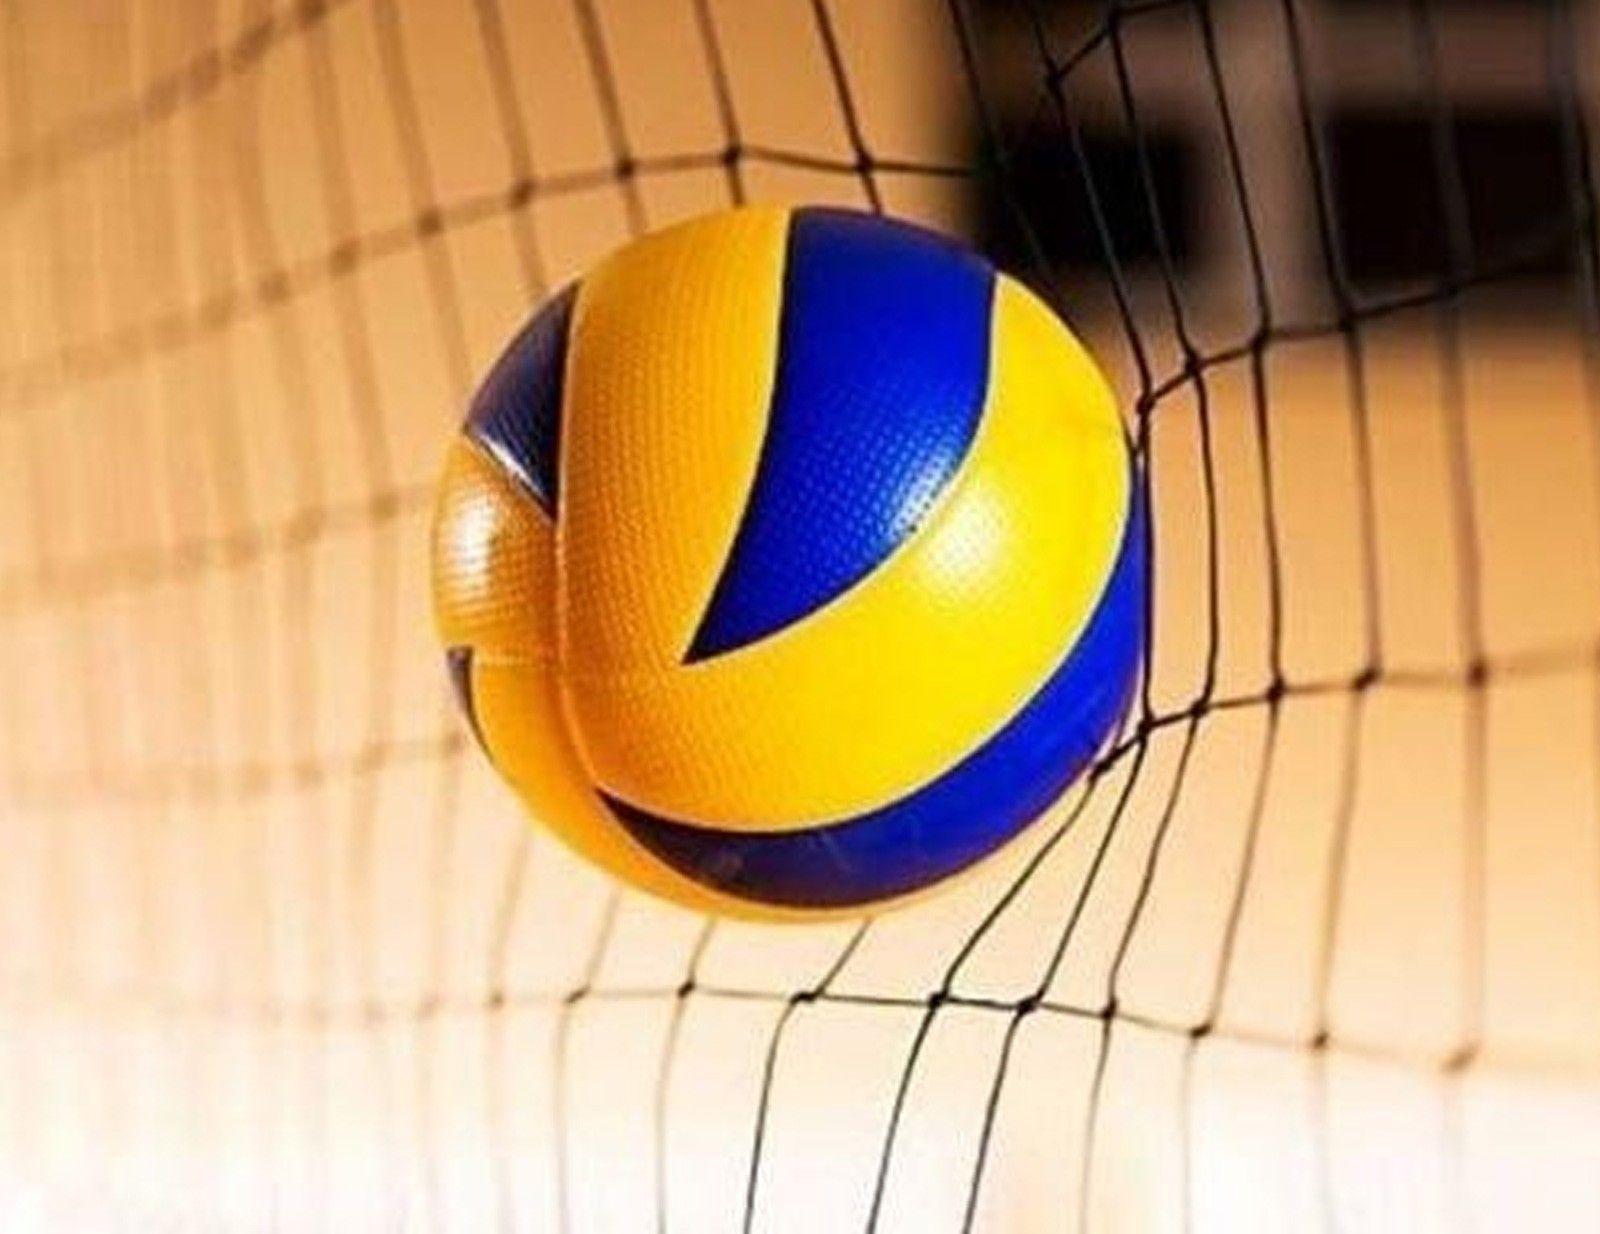 PVL teams want season opener moved to late May